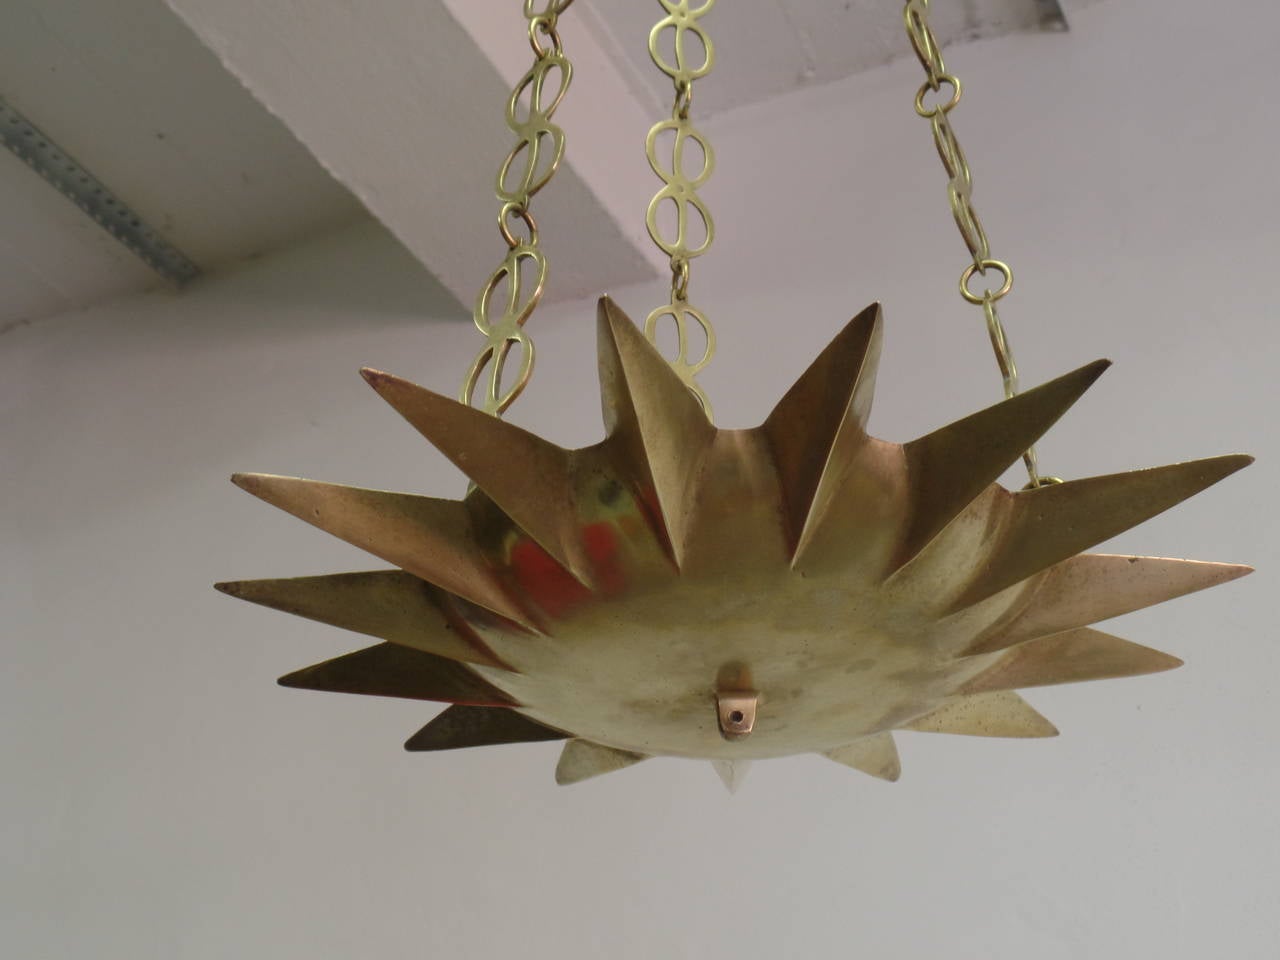 Stunning early 20th century French solid brass / gilt bronze 16 point star / sunburst form chandelier with delicate handmade chain in the modern neoclassical taste. The quality of design and materials are of the highest quality and the piece can be